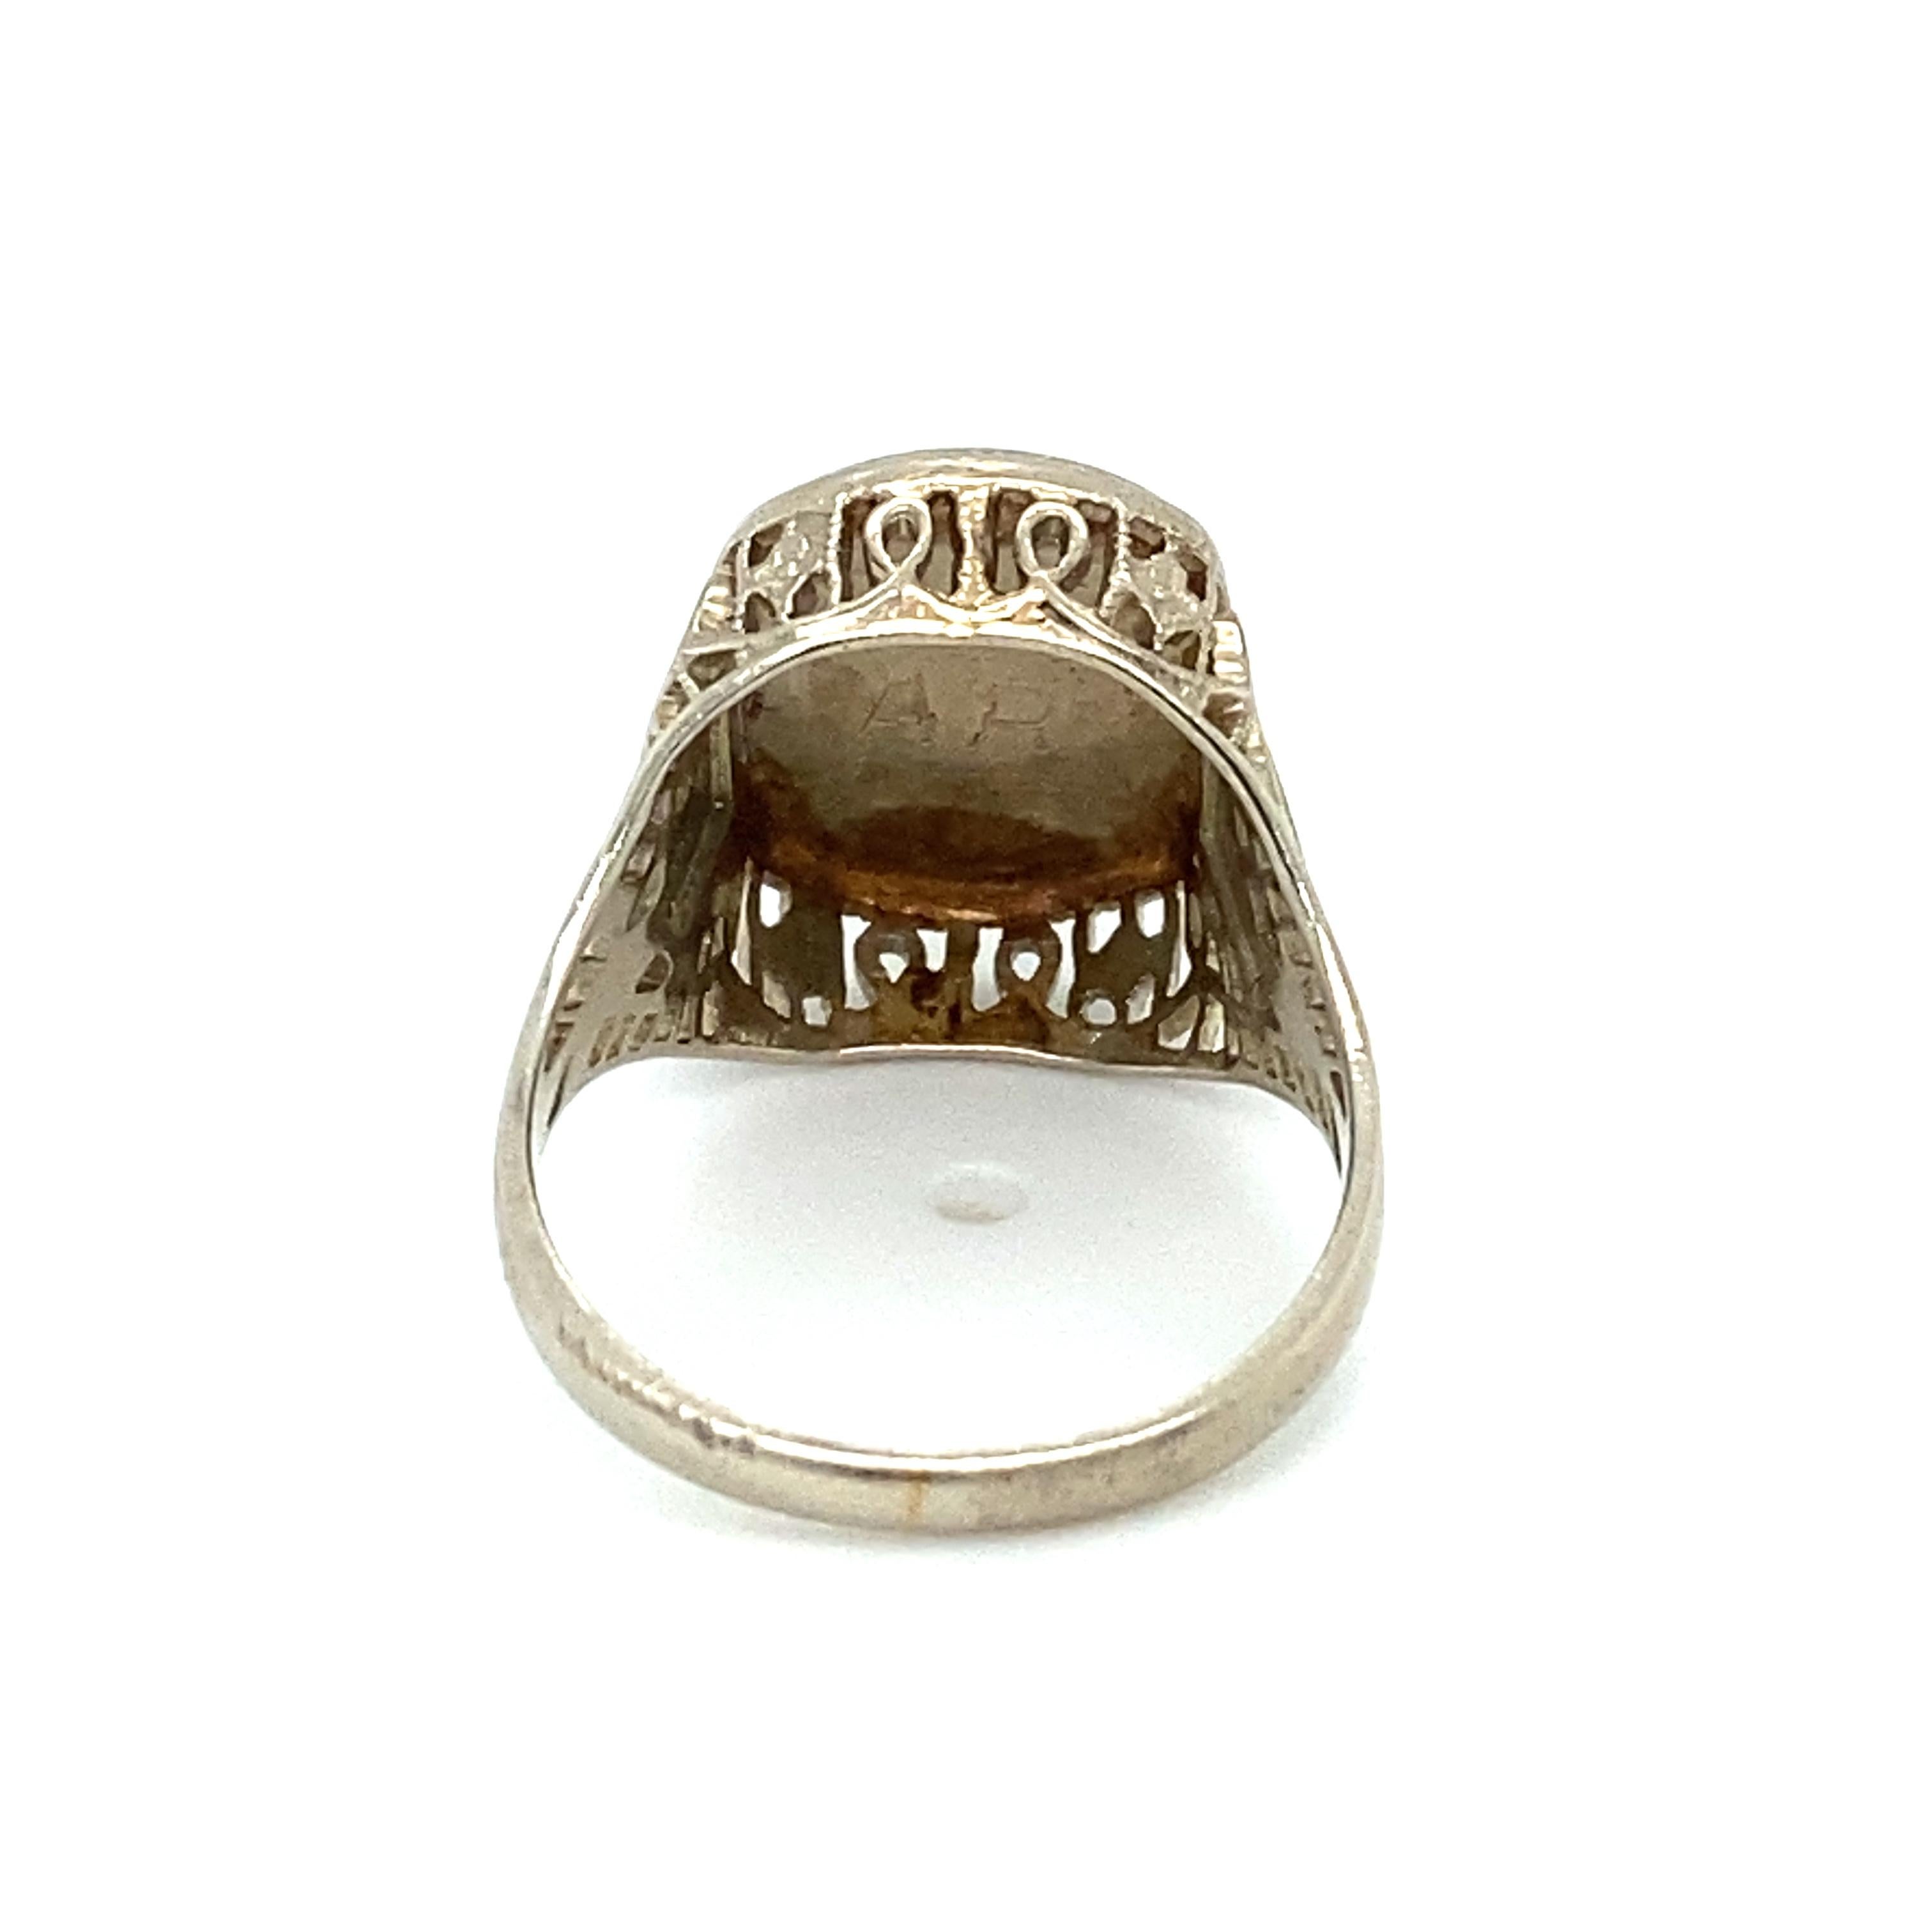 Item Details: This class ring is dated 1928 and features the initial E and an inscribed initials AR on the underside. It is crafted in 14 karat white and yellow gold. The gallery work is absolutely beautiful and intricate, reflecting the true art